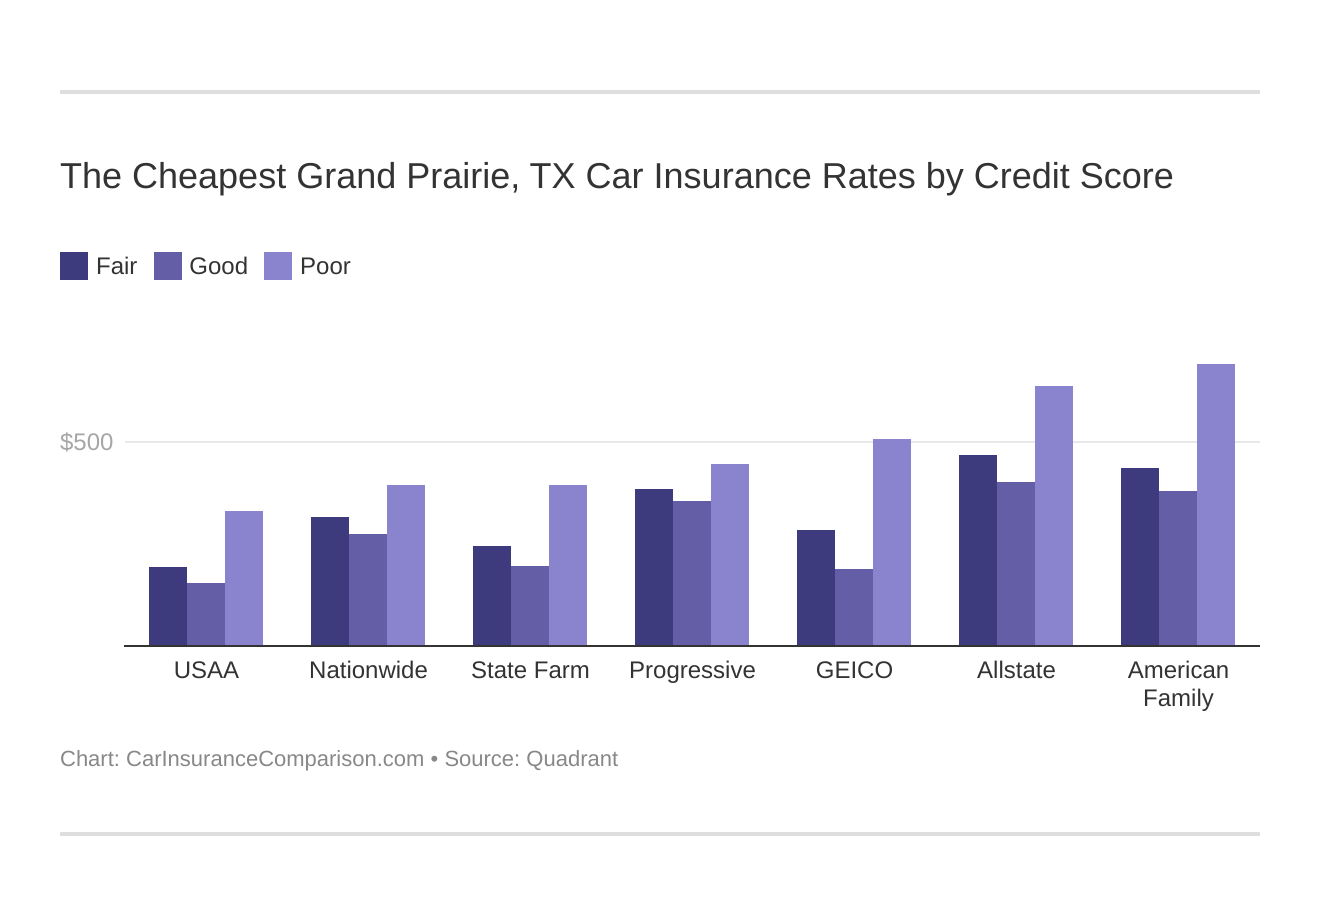 The Cheapest Grand Prairie, TX Car Insurance Rates by Credit Score